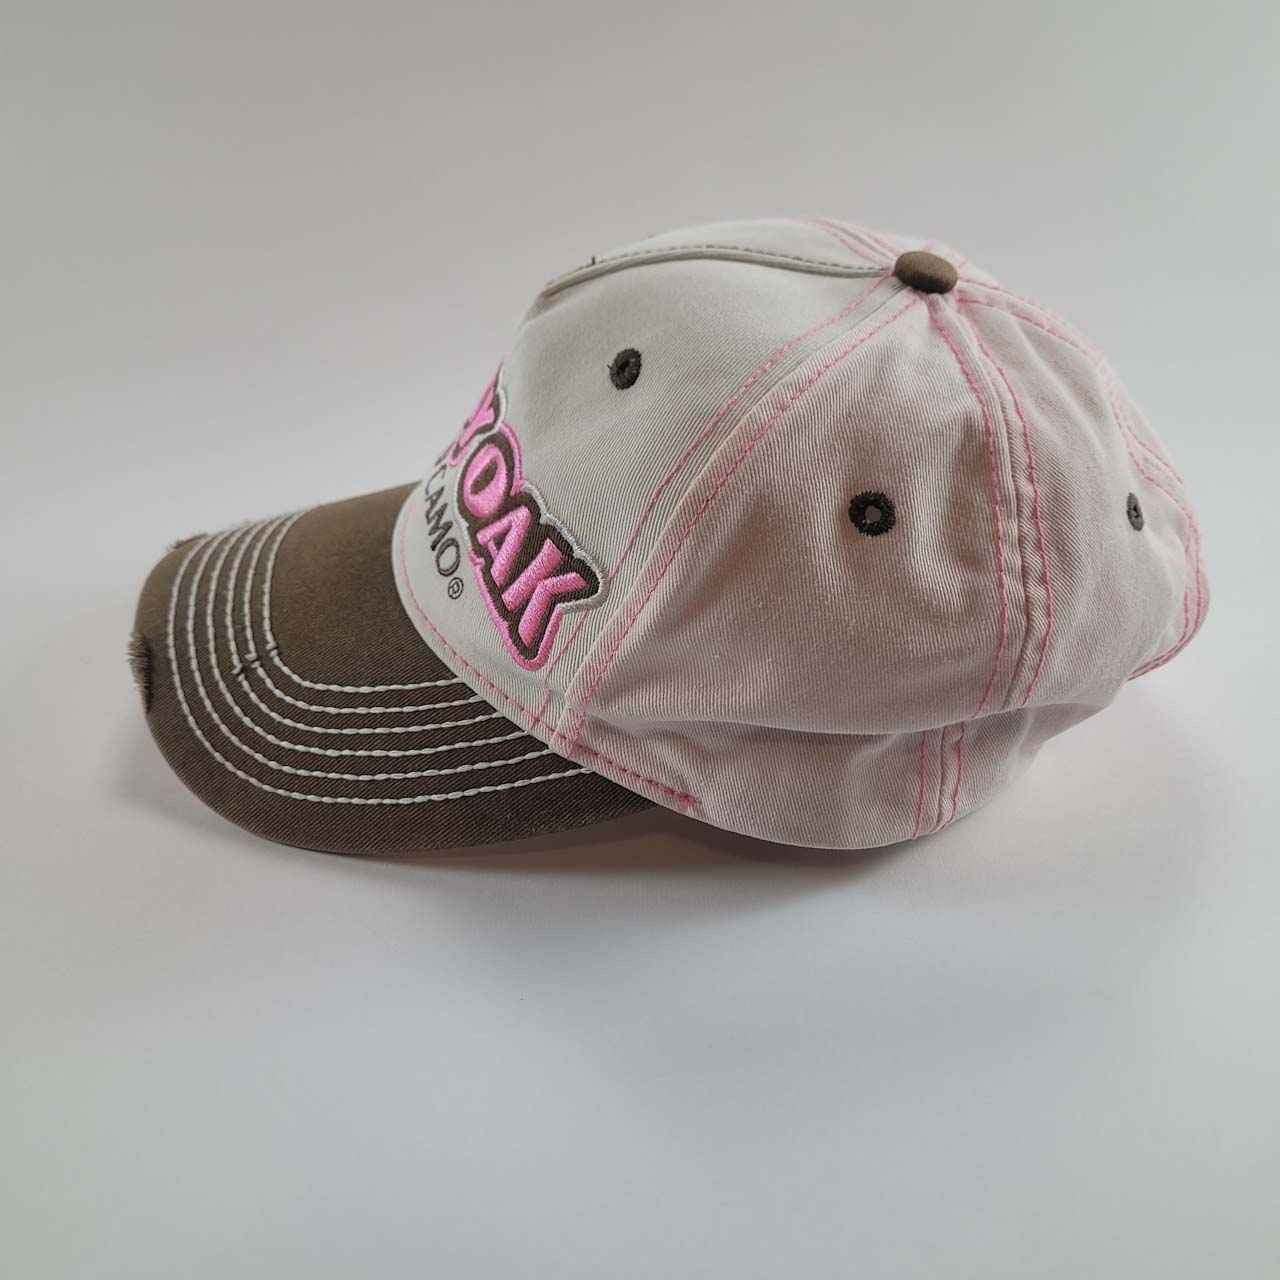 Cap - Mossy Oak - Distressed - Embroidered Front - Pink Brown Color -  Treasure Website